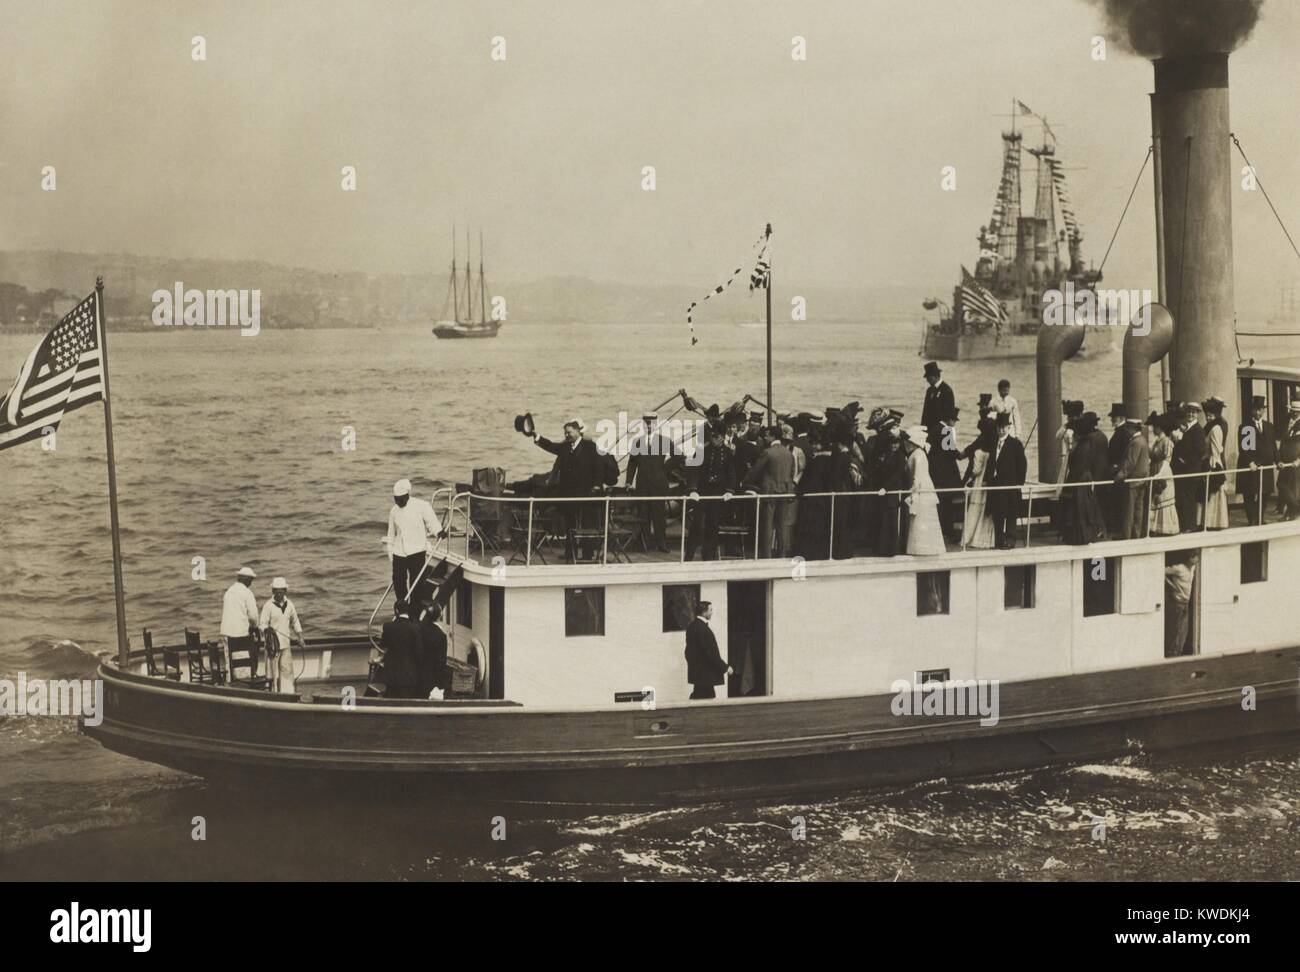 Enlarged details of Theodore Roosevelt (waving hat) and young Franklin and Eleanor Roosevelt. They are on the ferry boat, Androscoggin, in NYC Harbor, June 18, 1910 during Theodores welcome home after 9 months abroad in Africa and Europe (BSLOC 2017 8 21) Stock Photo